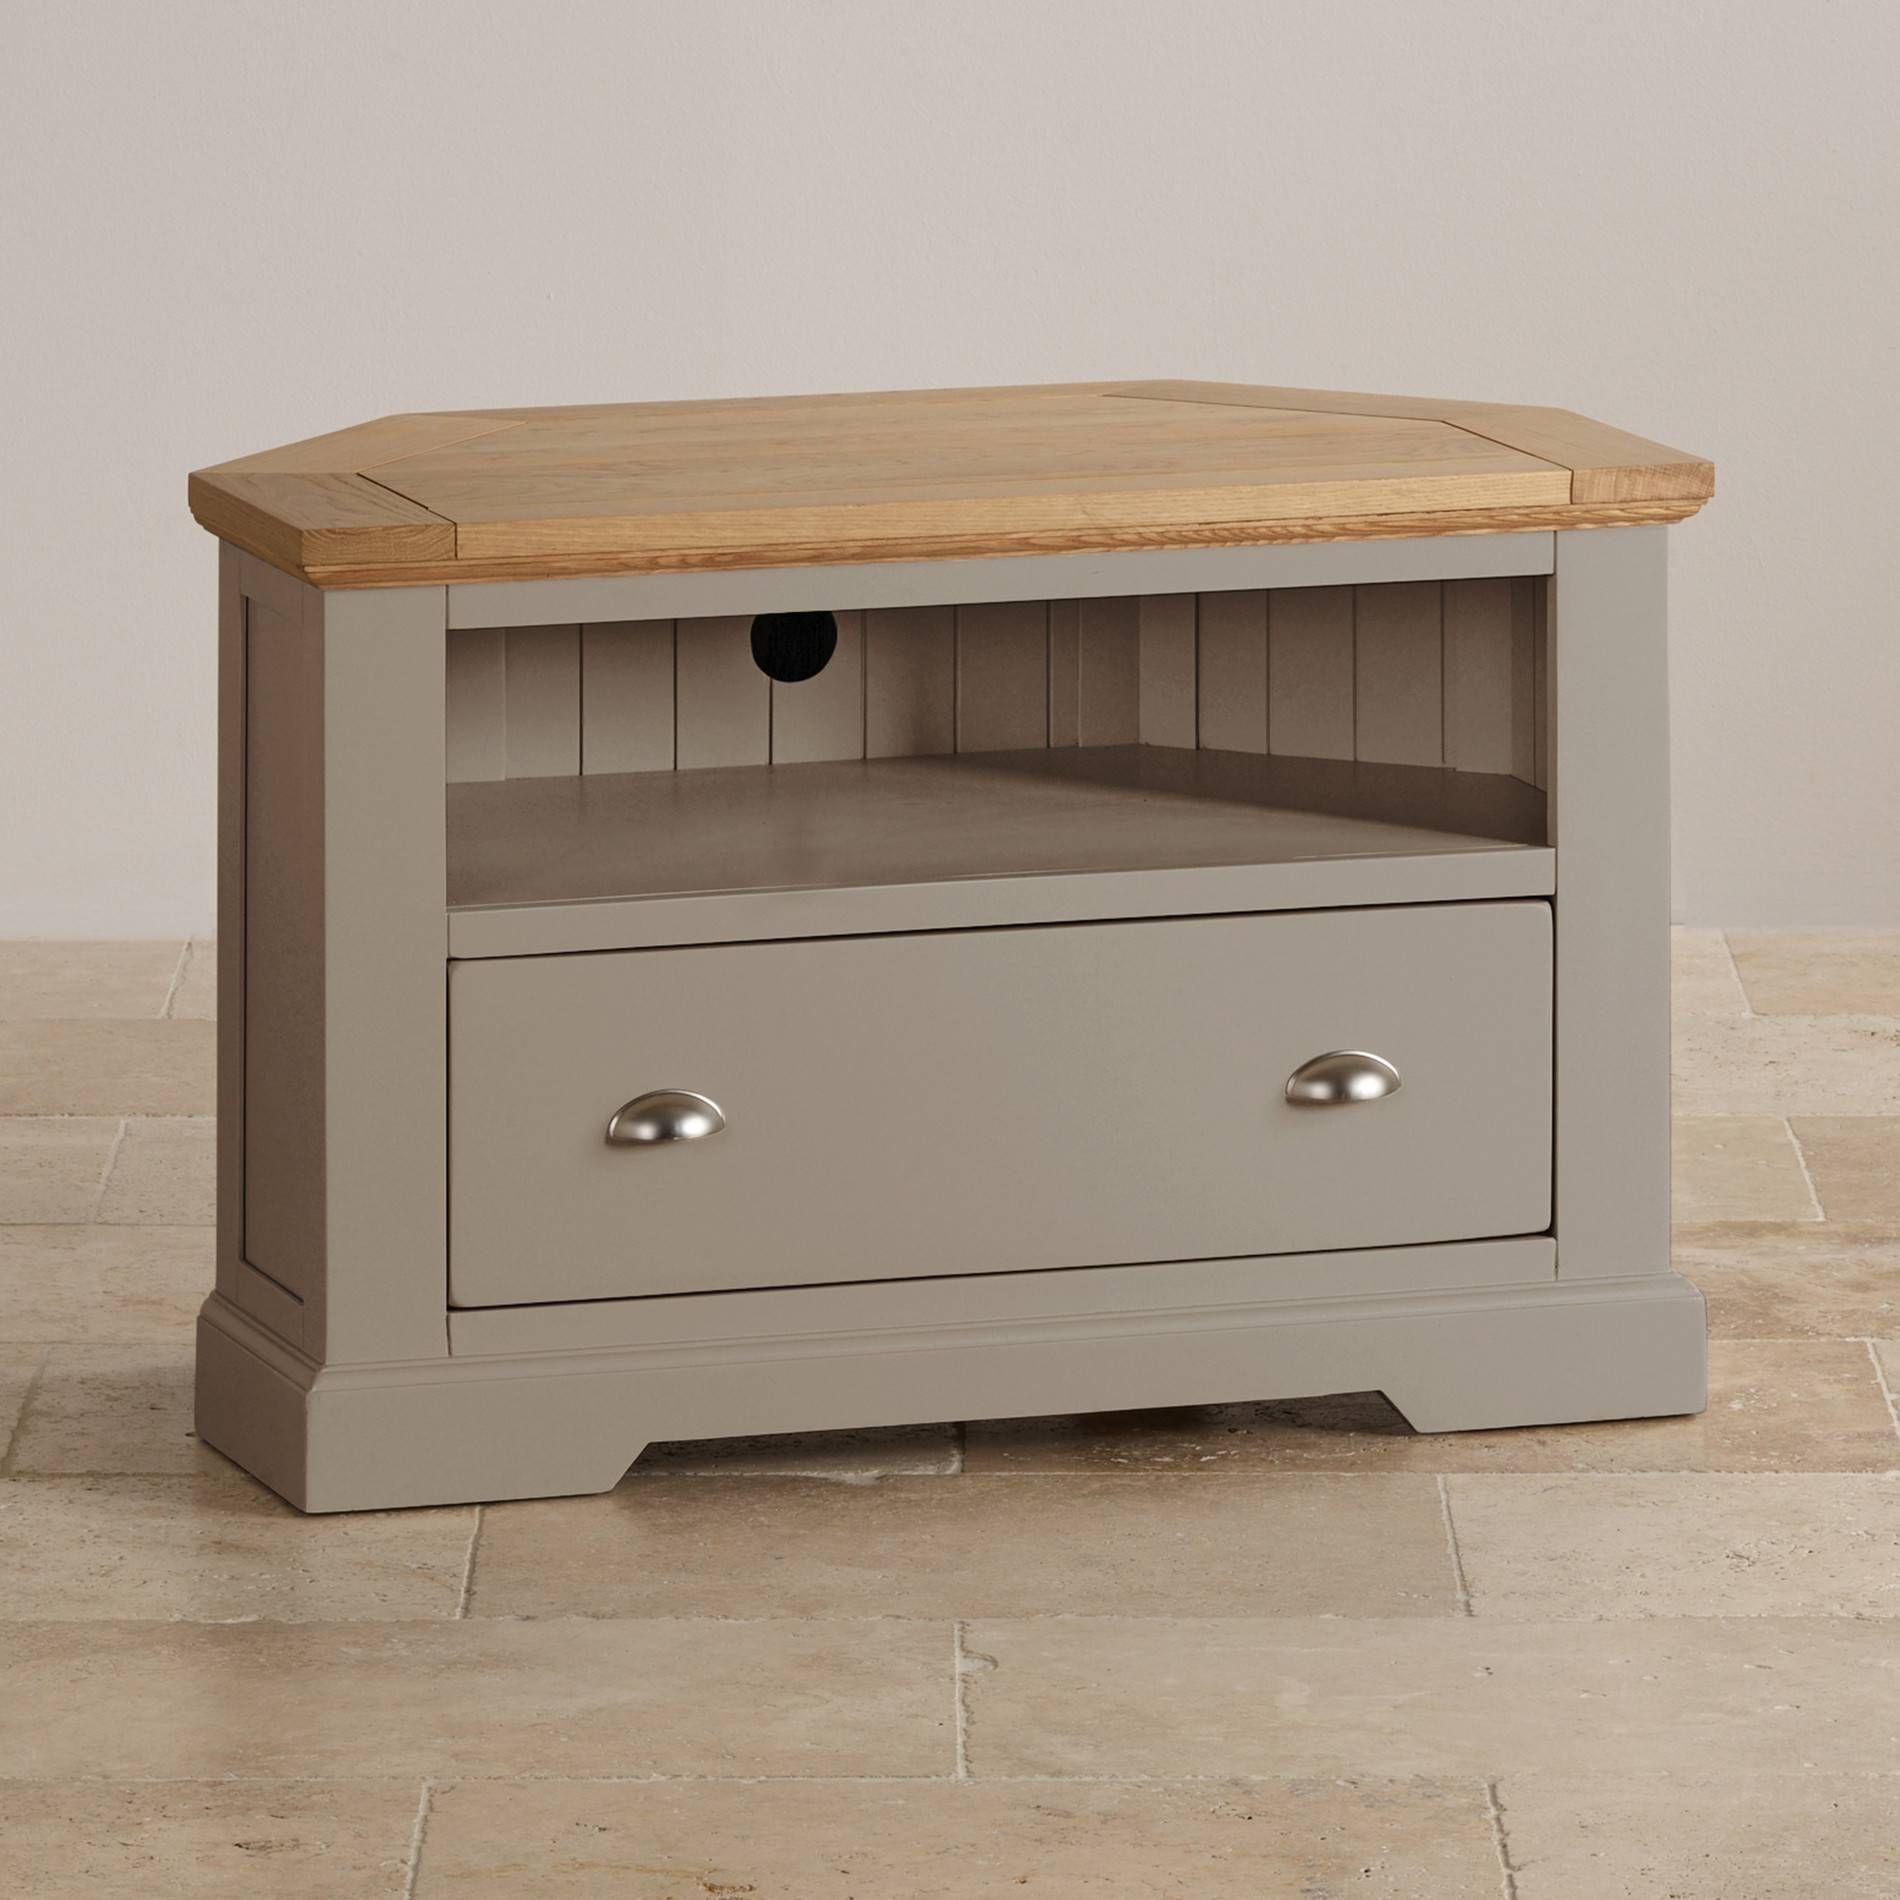 St Ives Corner Tv Unit In Grey Painted Acacia With Oak Top Throughout Painted Corner Tv Cabinets (View 2 of 15)